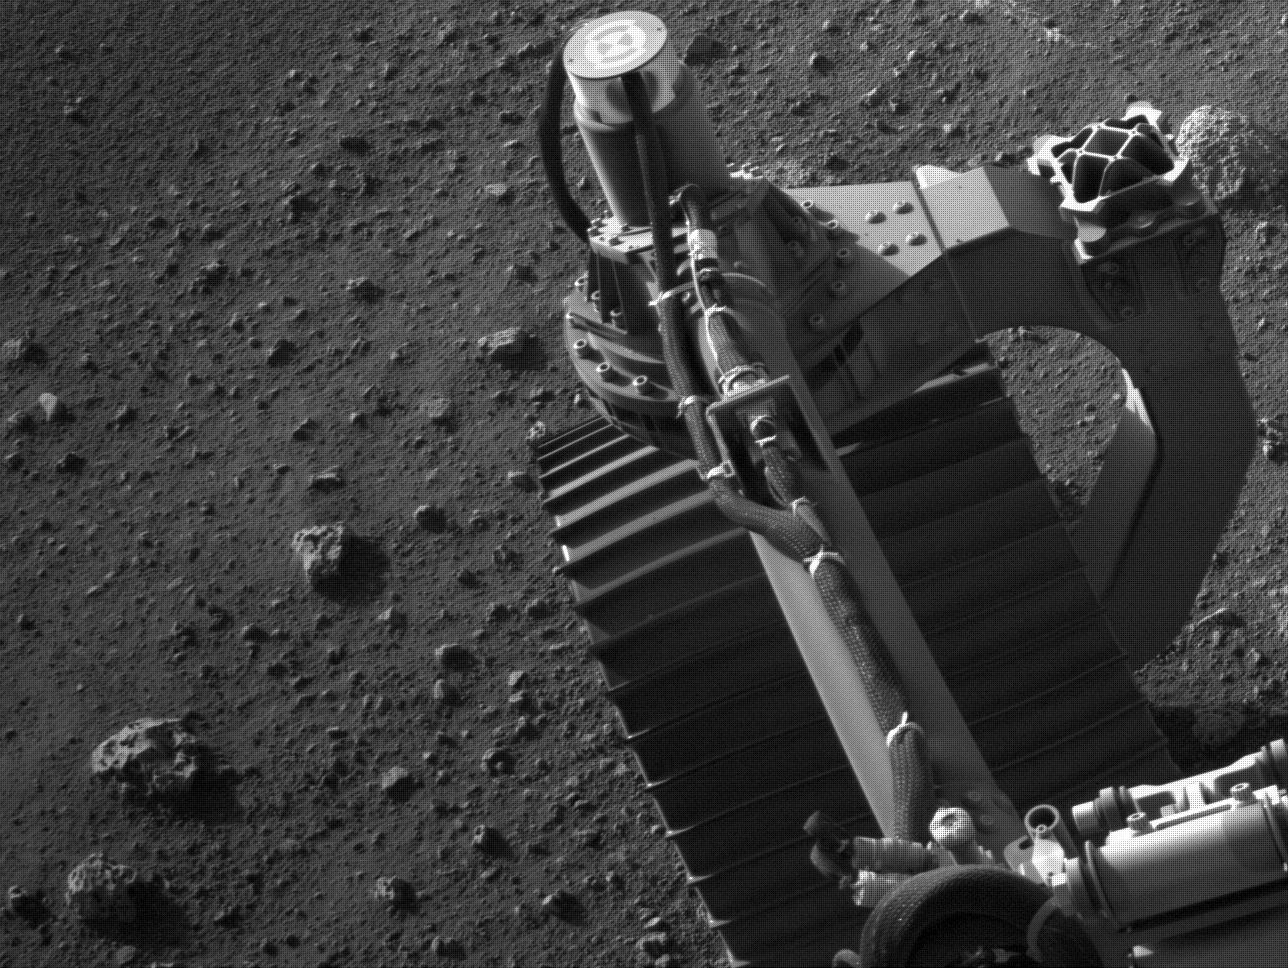 This February 28 image shows perseverance tires and a portion of Martian soil - NASA/JPL-Caltech